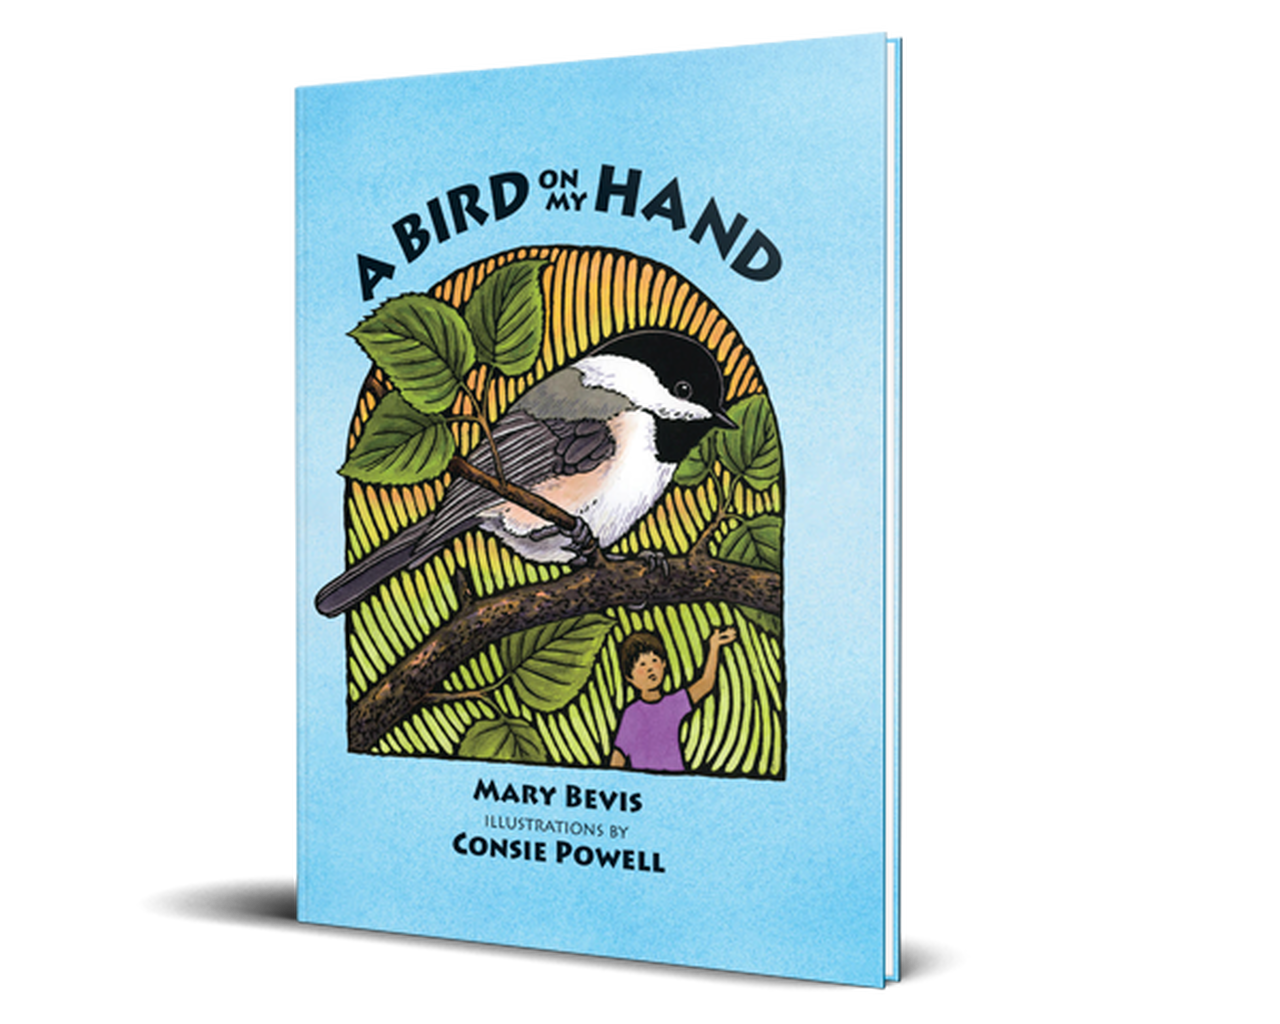 Legacy Bound-A Bird on my Hand - Hardcover-LBP2406